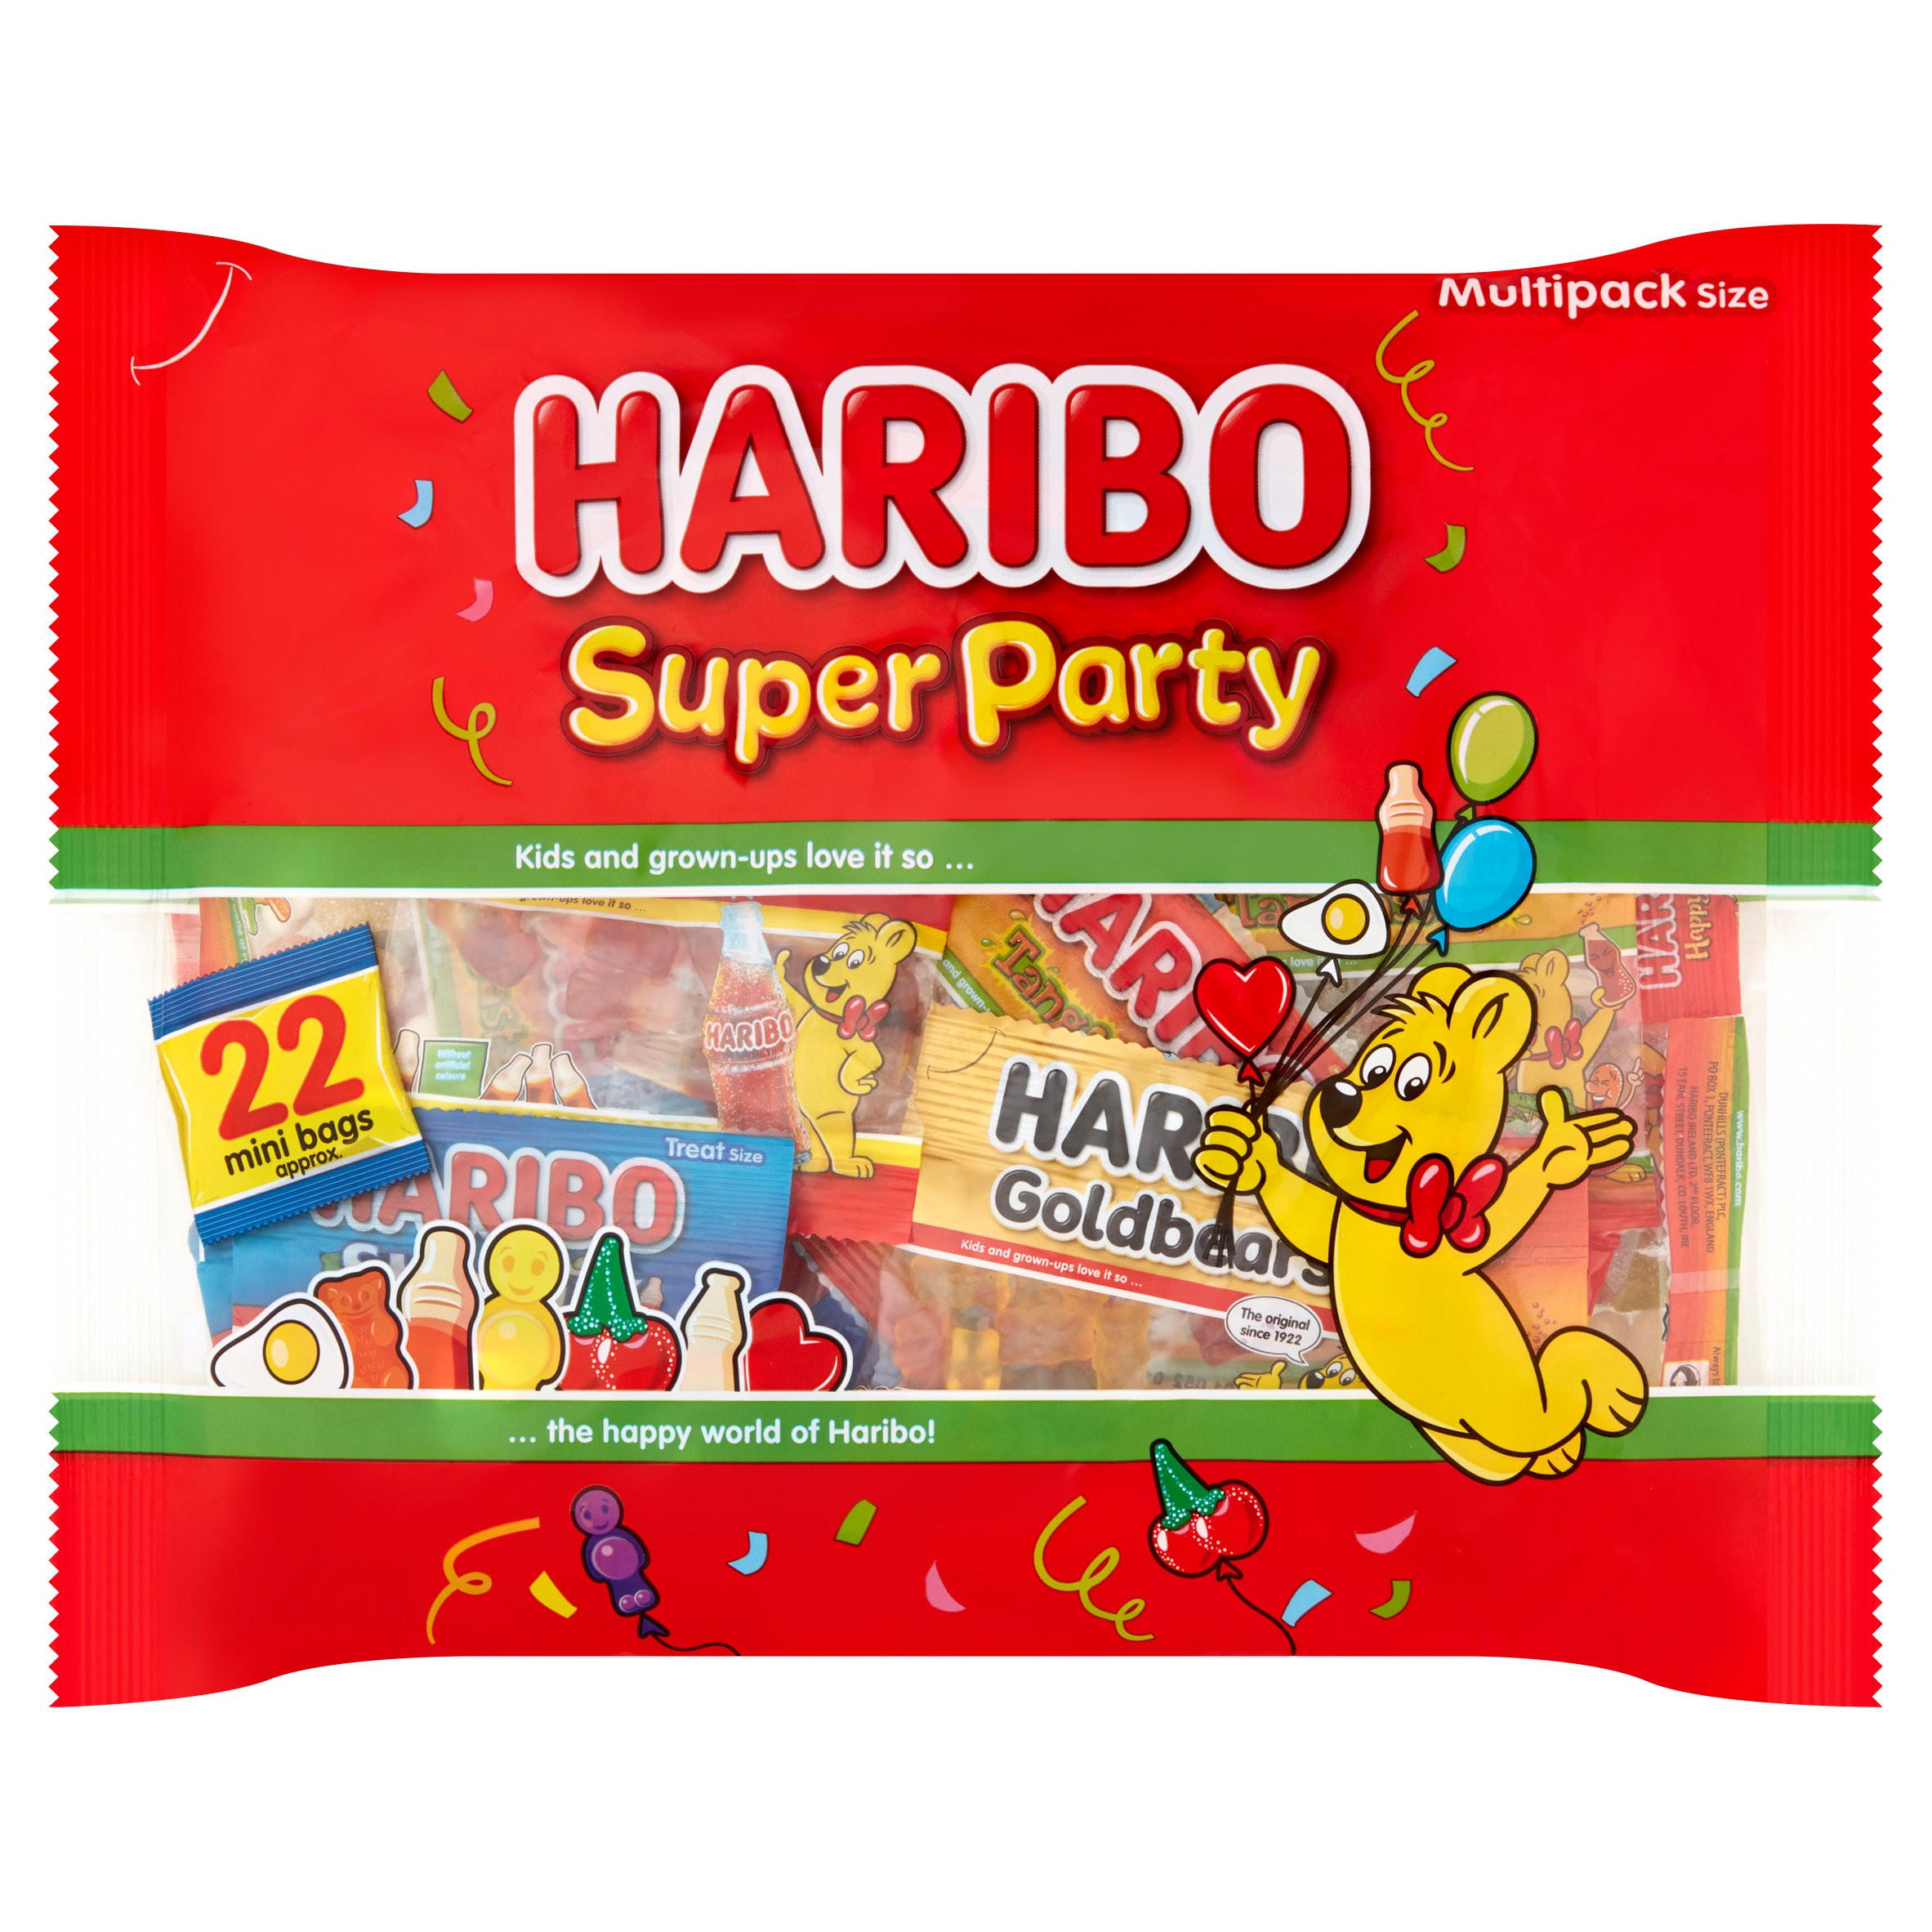 HARIBO Super Party Multipack 352g | Sweets | Iceland Foods